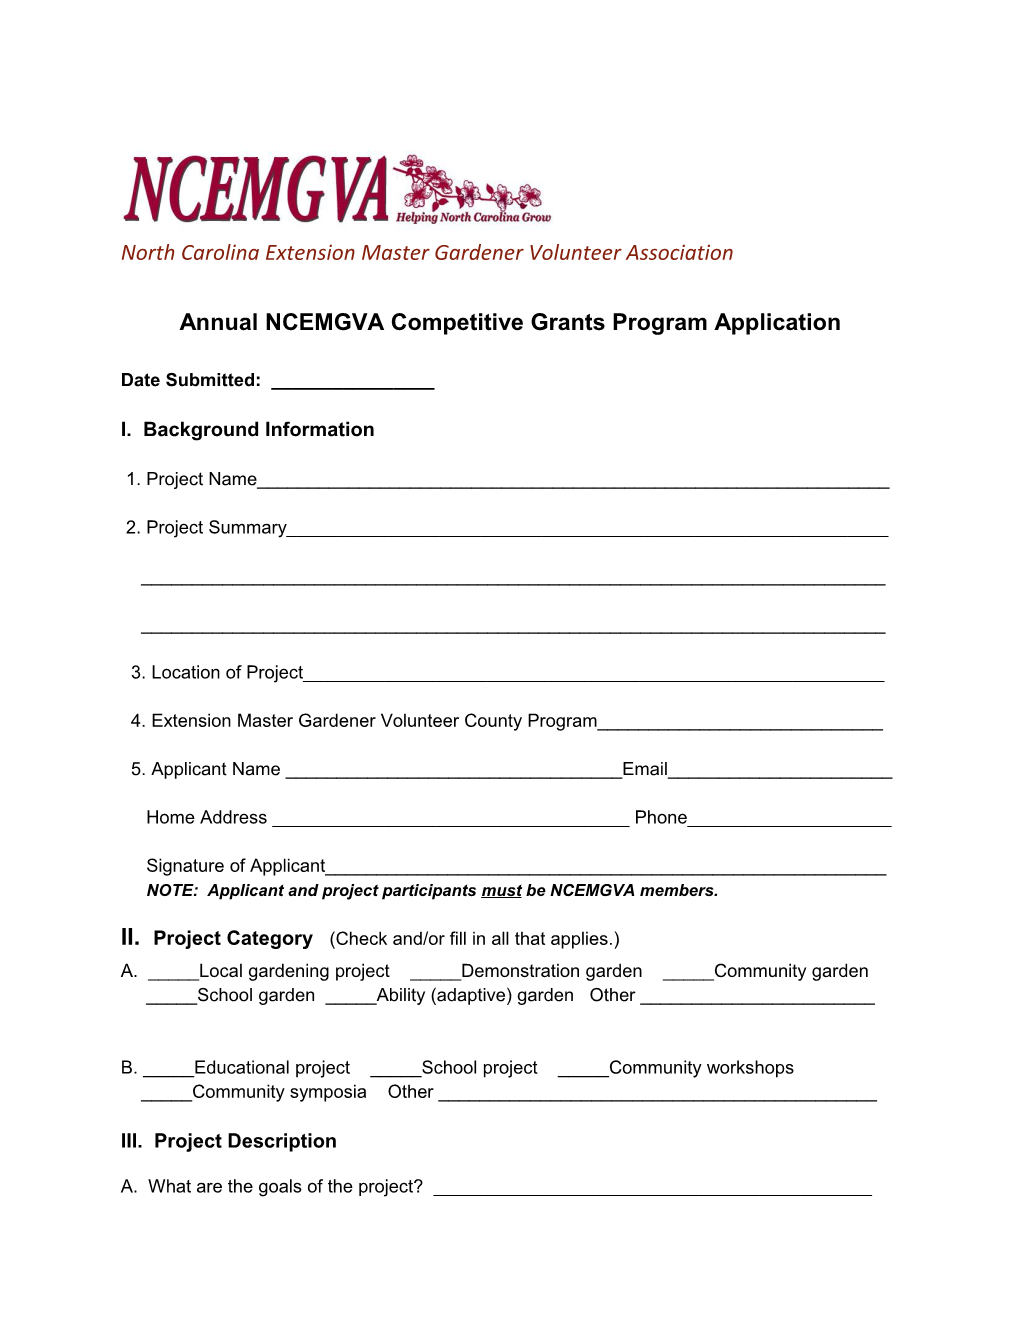 Annual NCEMGVA Competitive Grants Program Guidelines